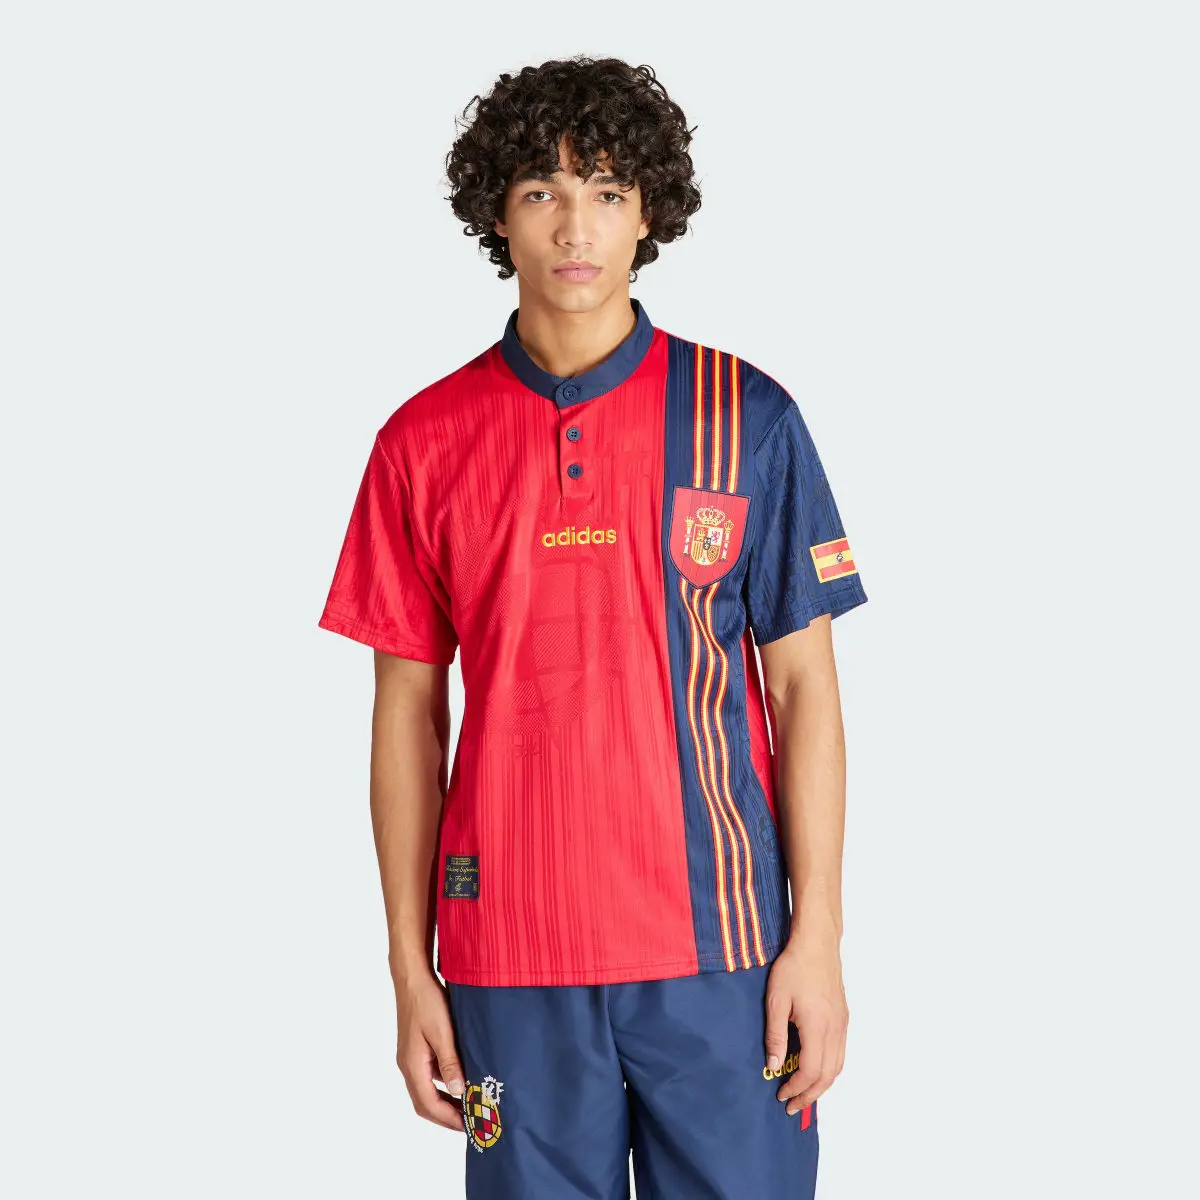 Adidas Spain 1996 Home Jersey. 2